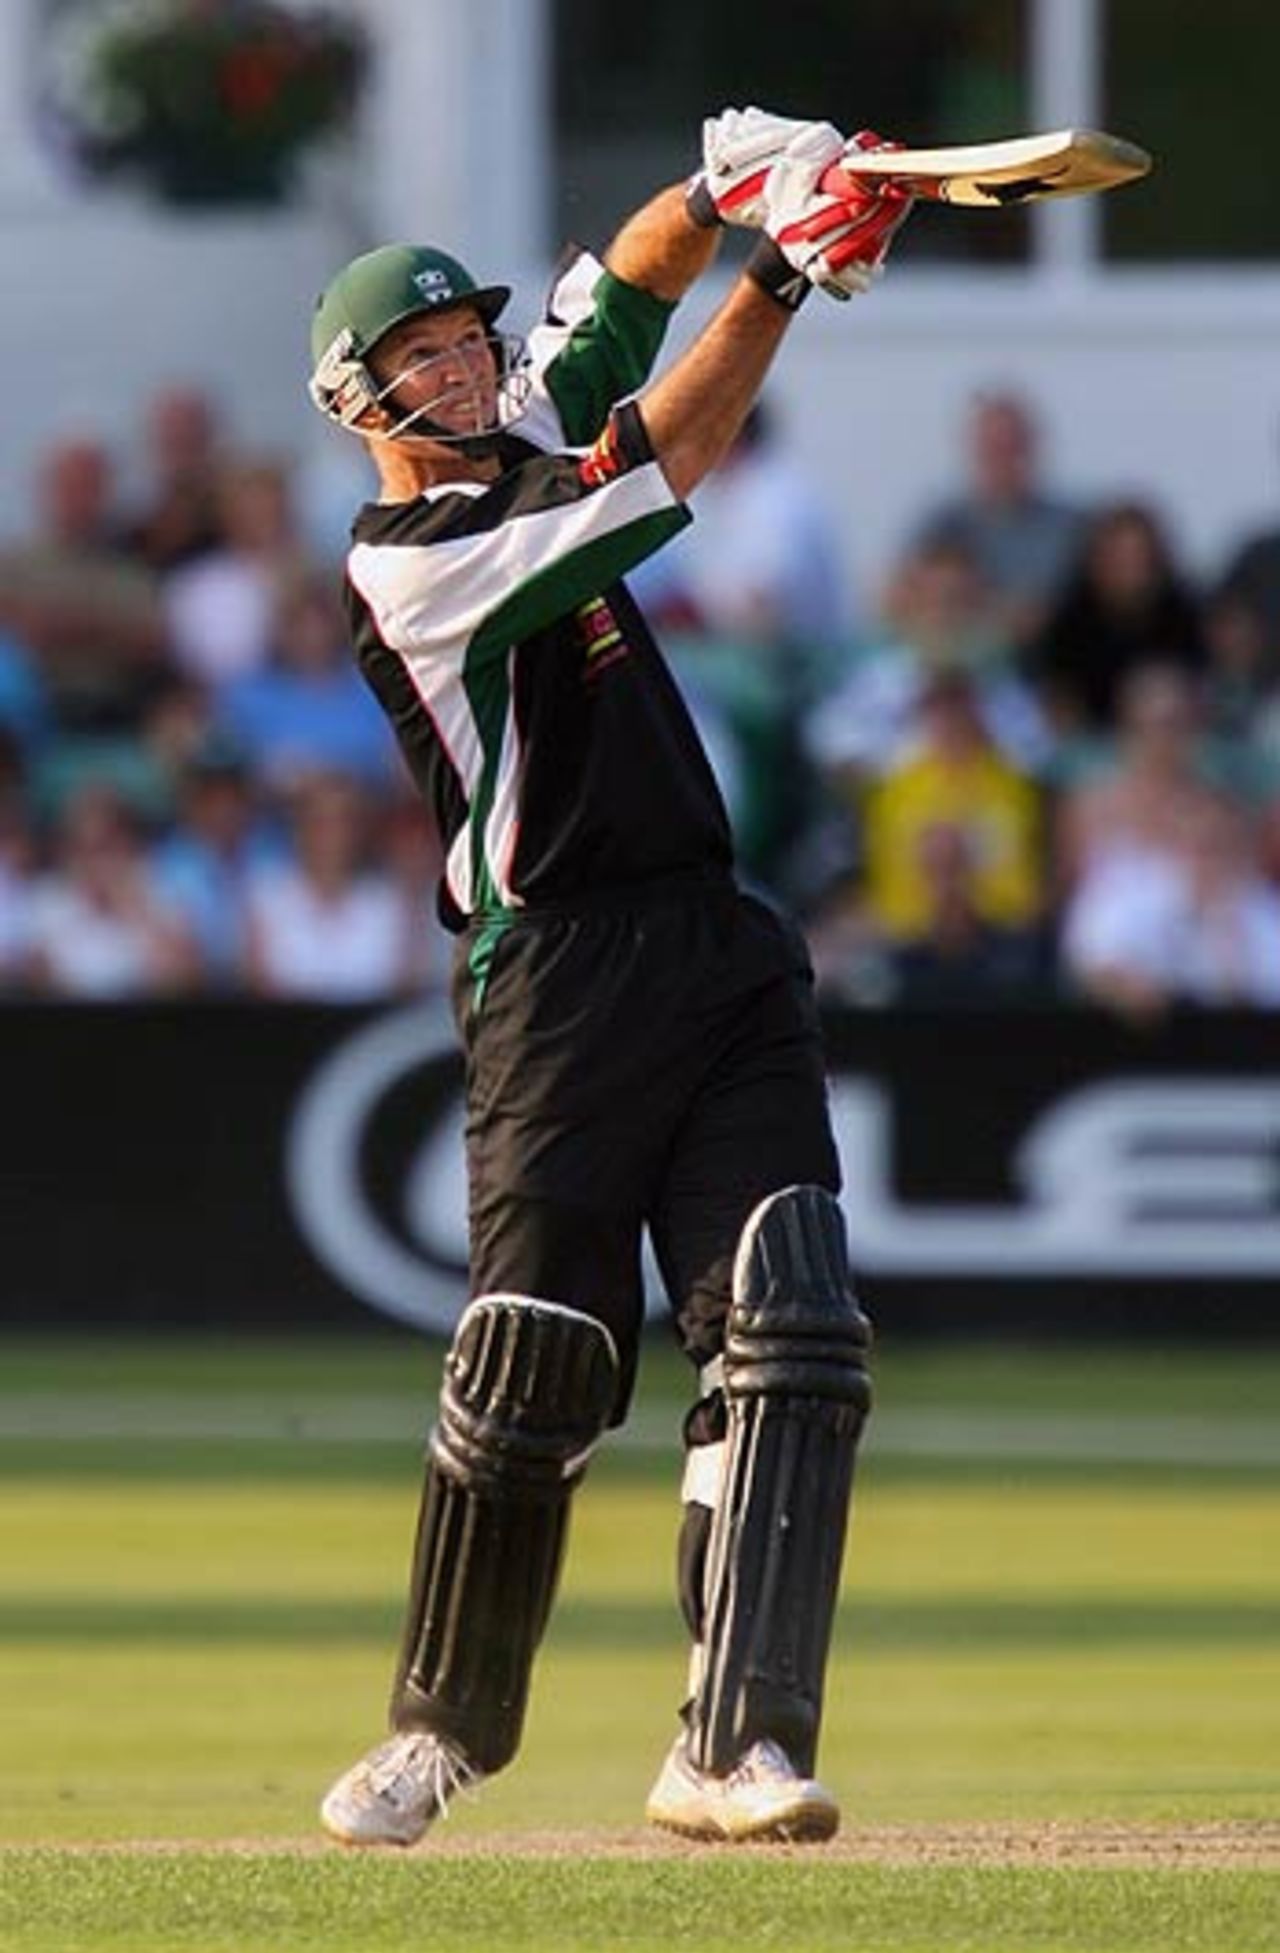 Graeme Hick bashed 75 off 34 balls but Worcestershire still lost, Worcestershire v Gloucestershire, Twenty20 Cup, Worcester, July 6, 2006